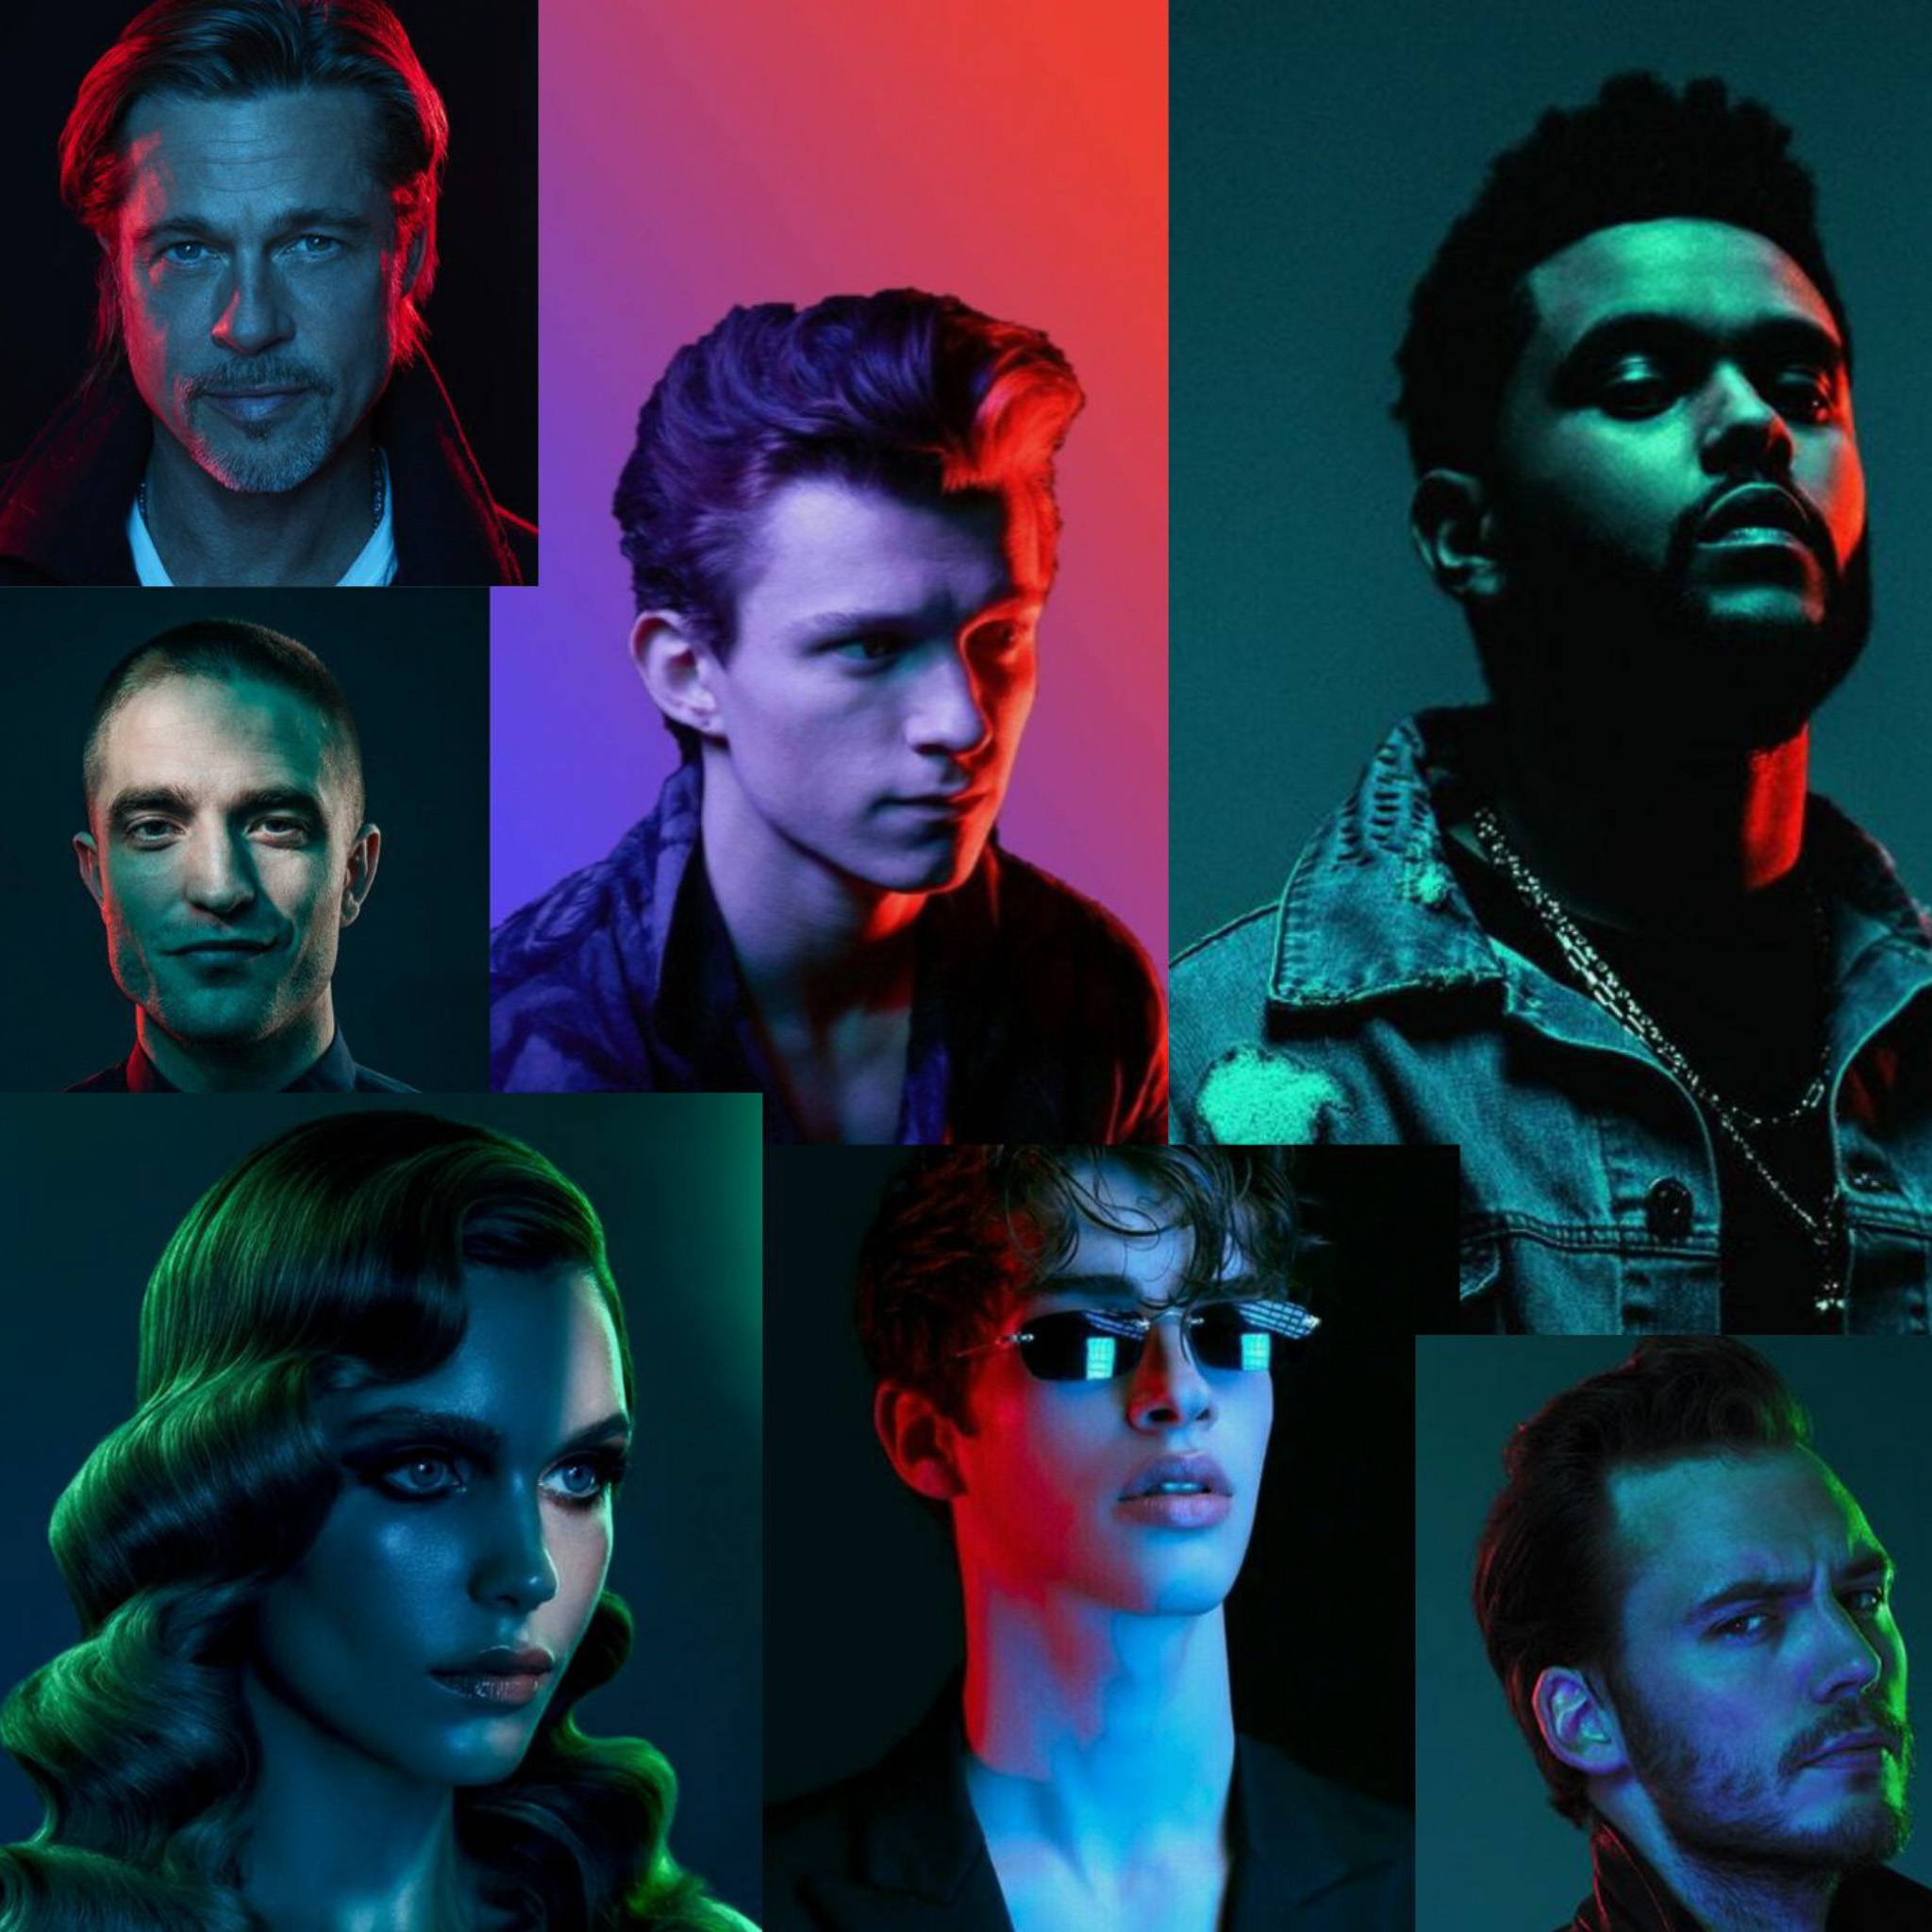 A collage of images featuring famous faces with dark, moody red, green, black, purple and blue lighting. 